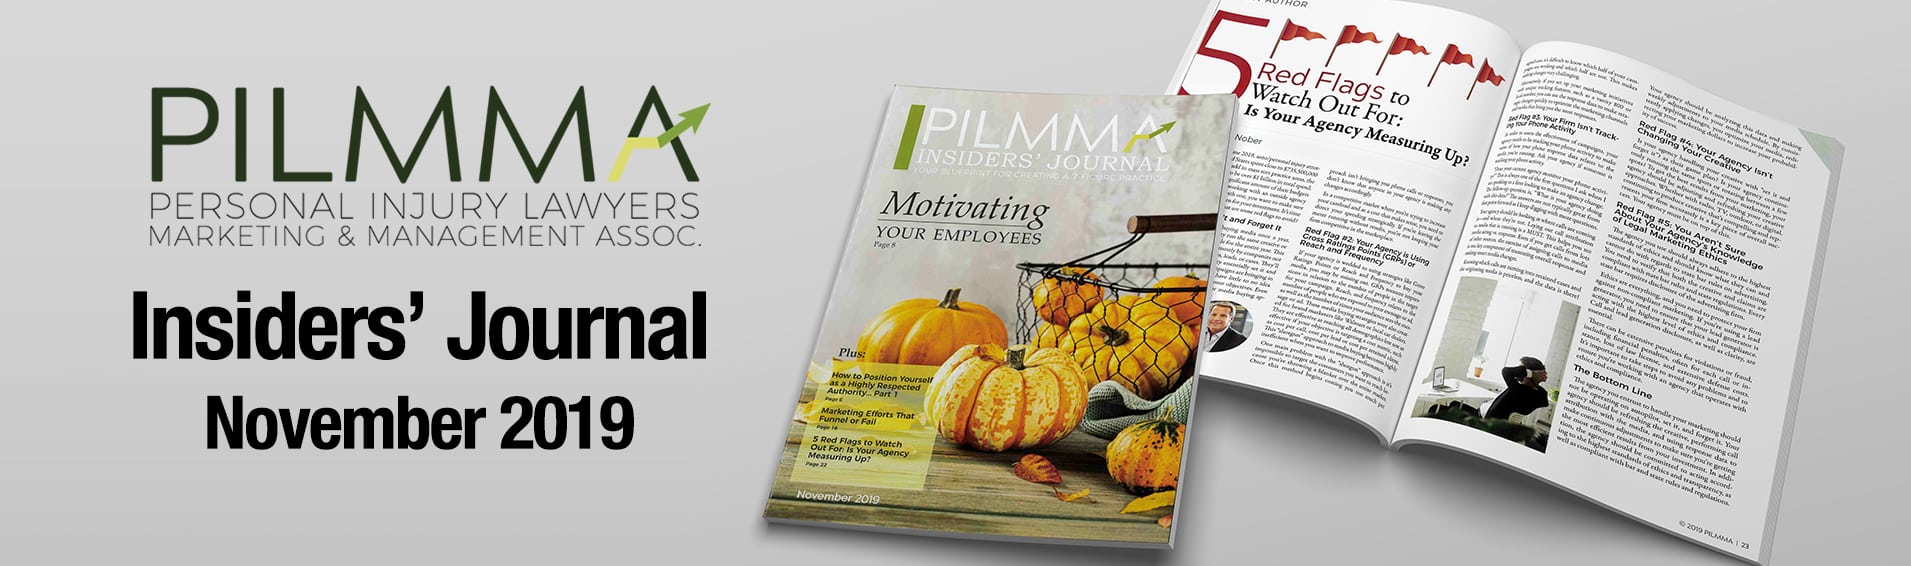 Graphic featuring PILMMA Insiders' Journal November 2019